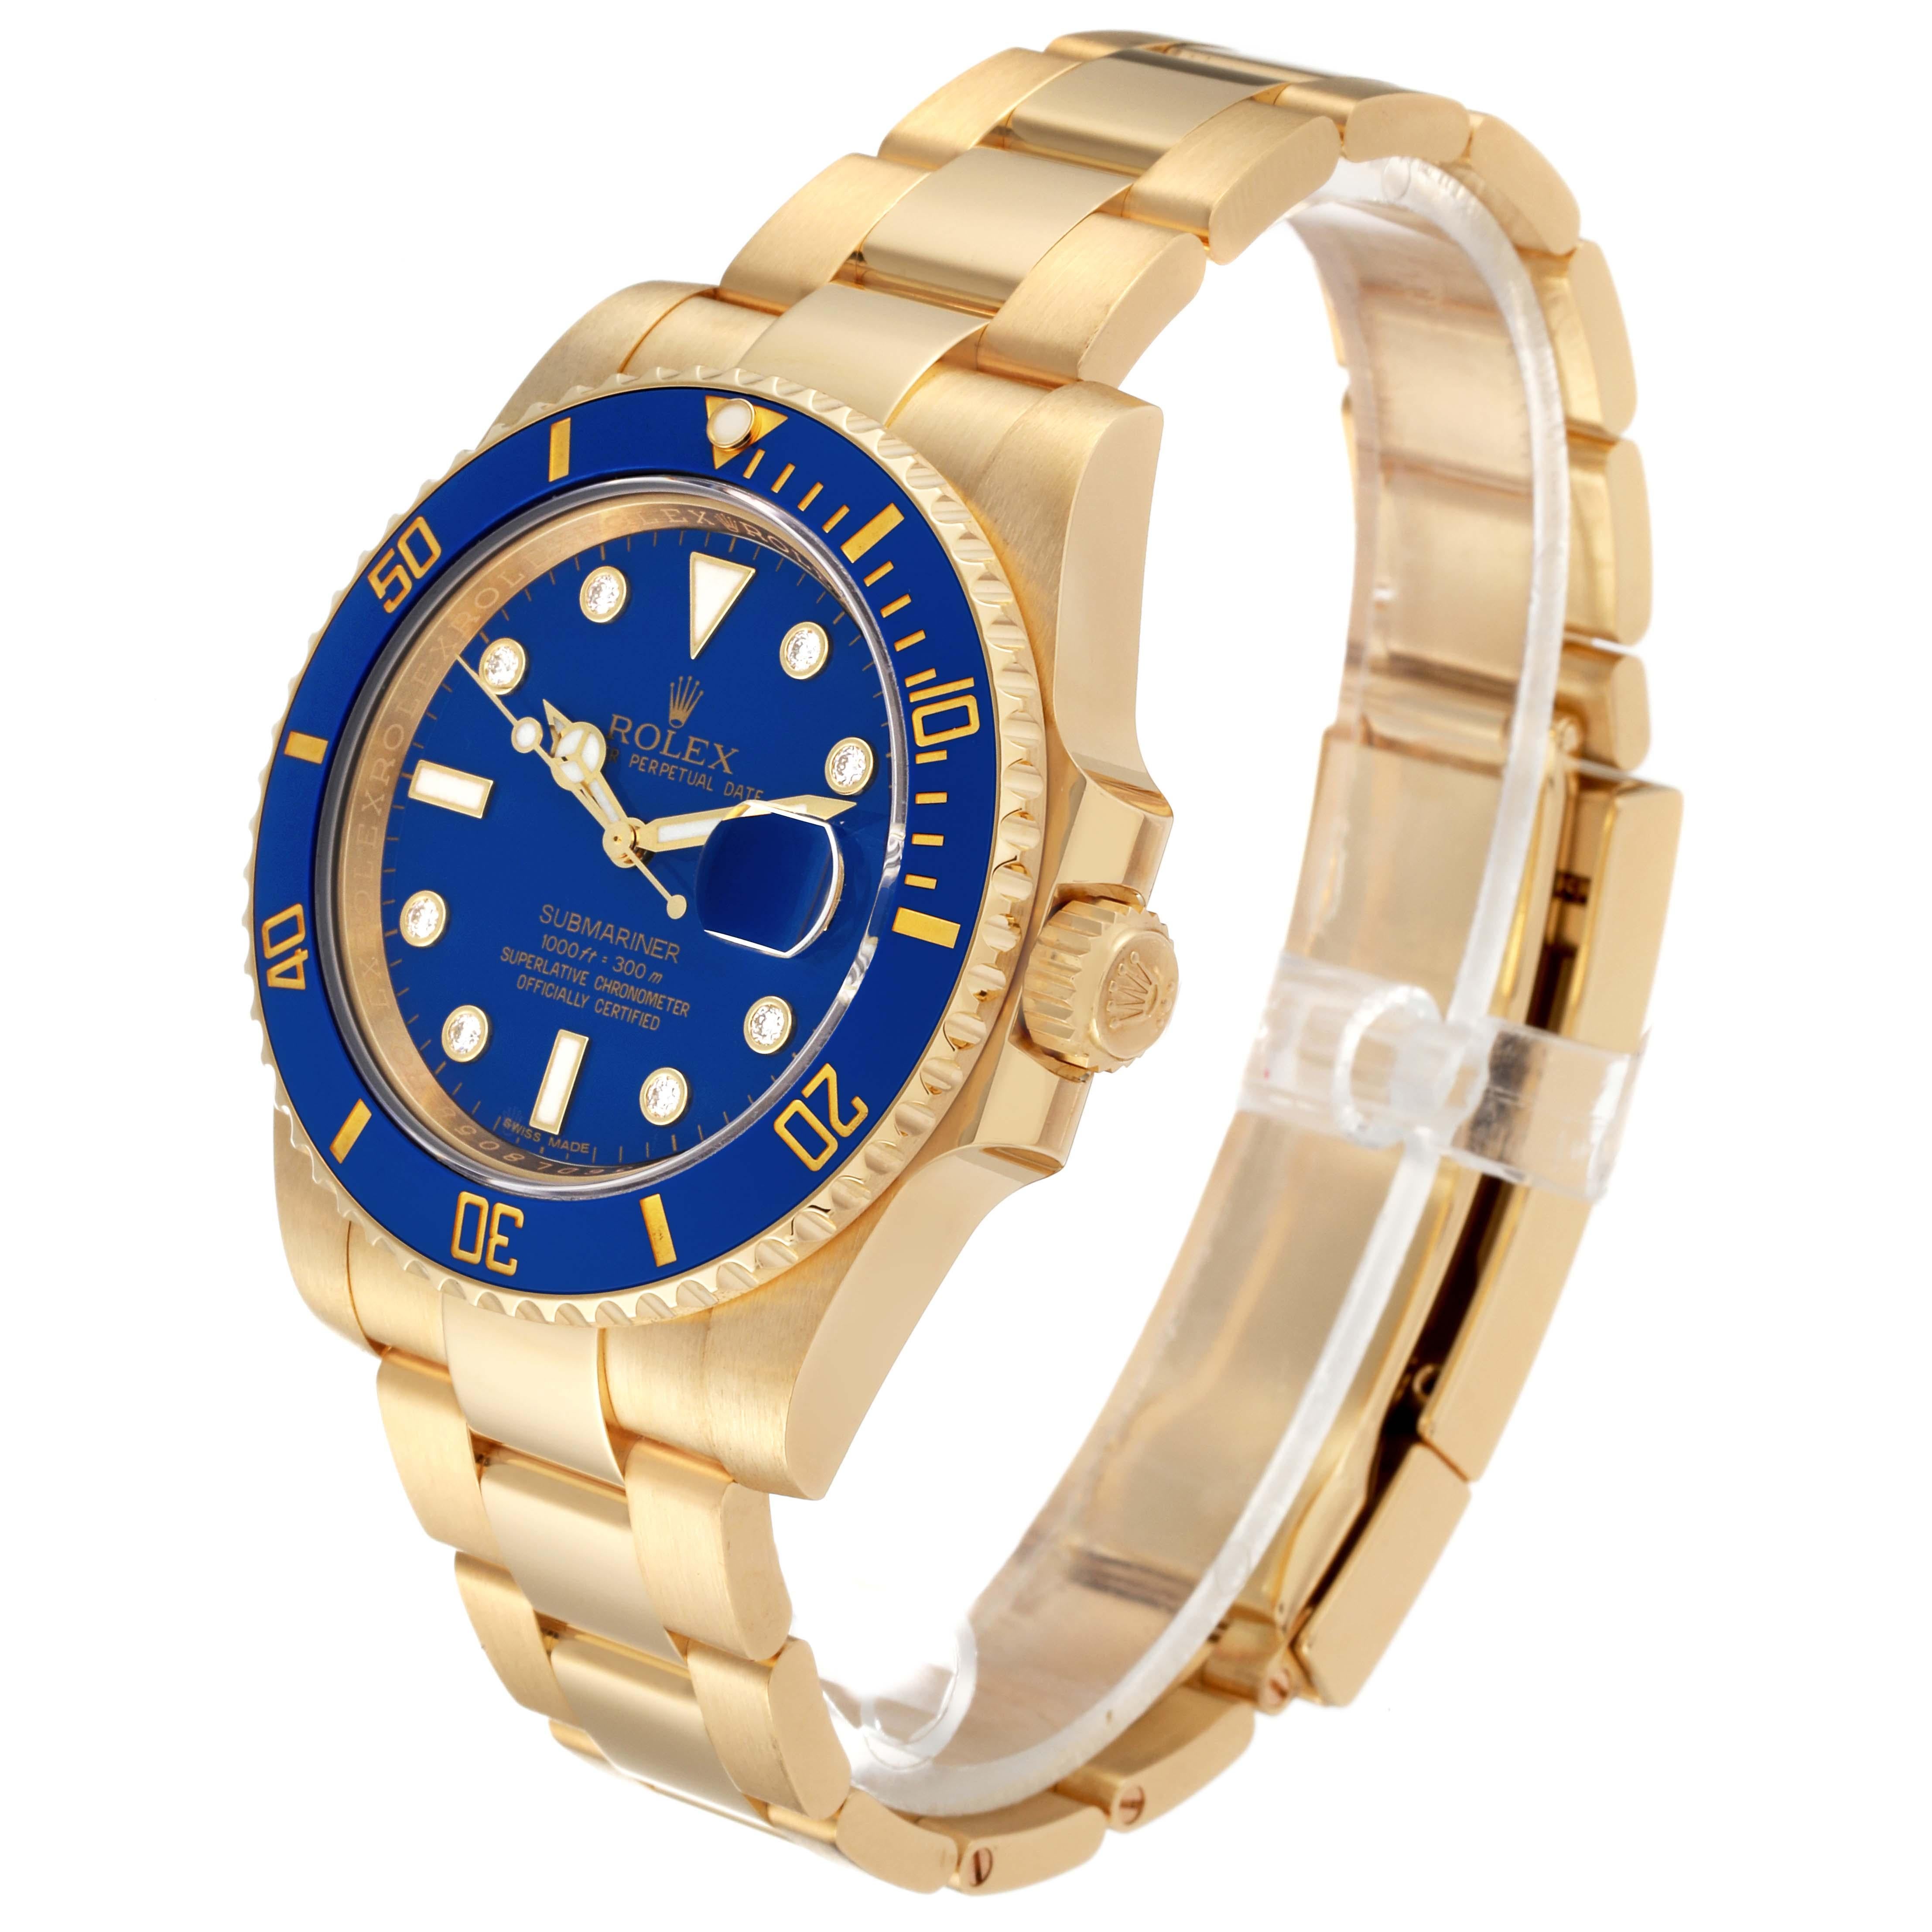 Rolex Submariner Yellow Gold Blue Diamond Dial Mens Watch 116618 Box Card For Sale 3